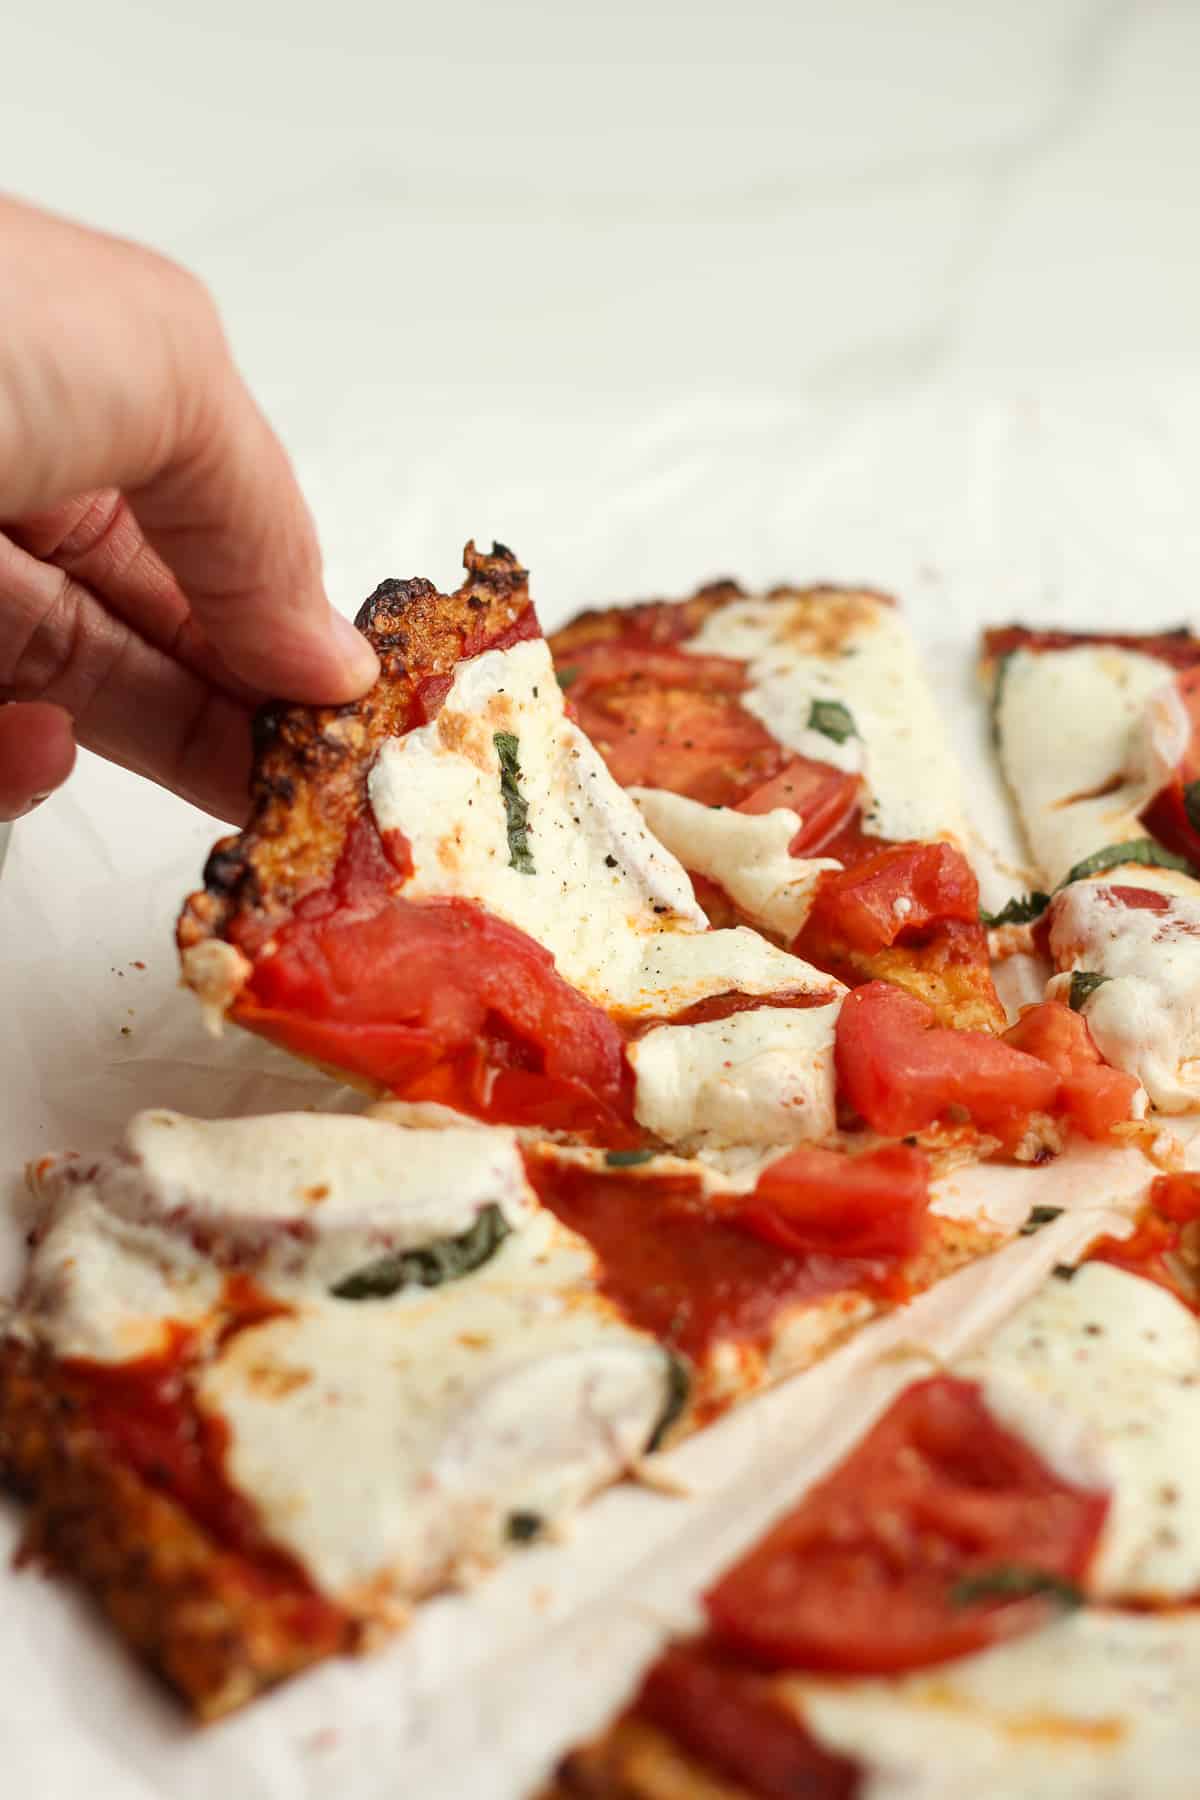 Side shot of a hand picking up a piece of Margherita pizza on cauliflower crust.